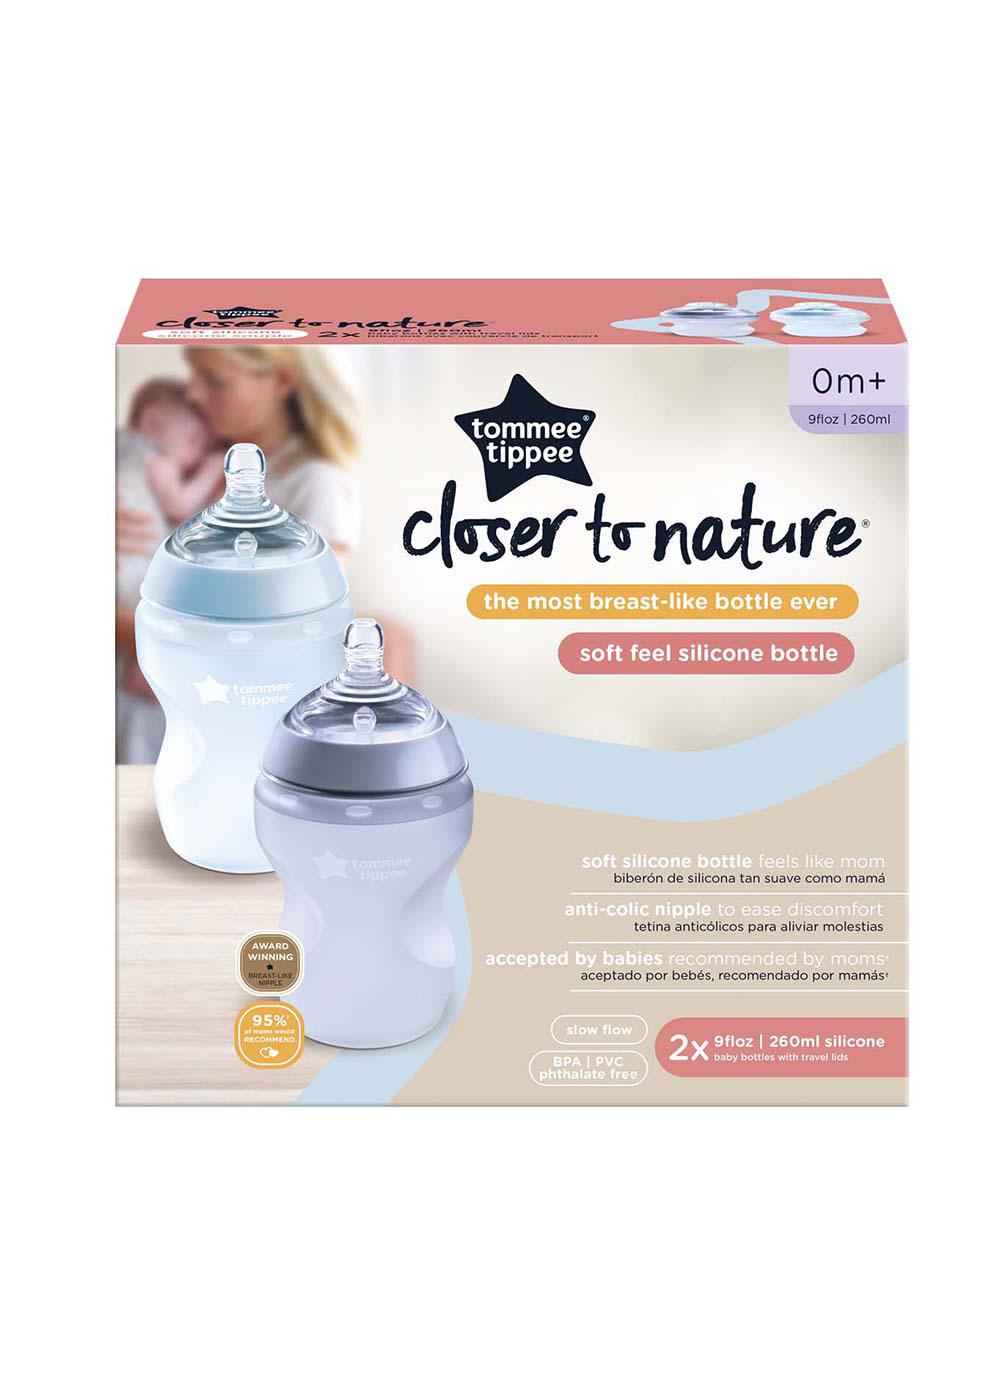 Tommee Tippee Closer To Nature 9 oz Silicone Bottles; image 1 of 2